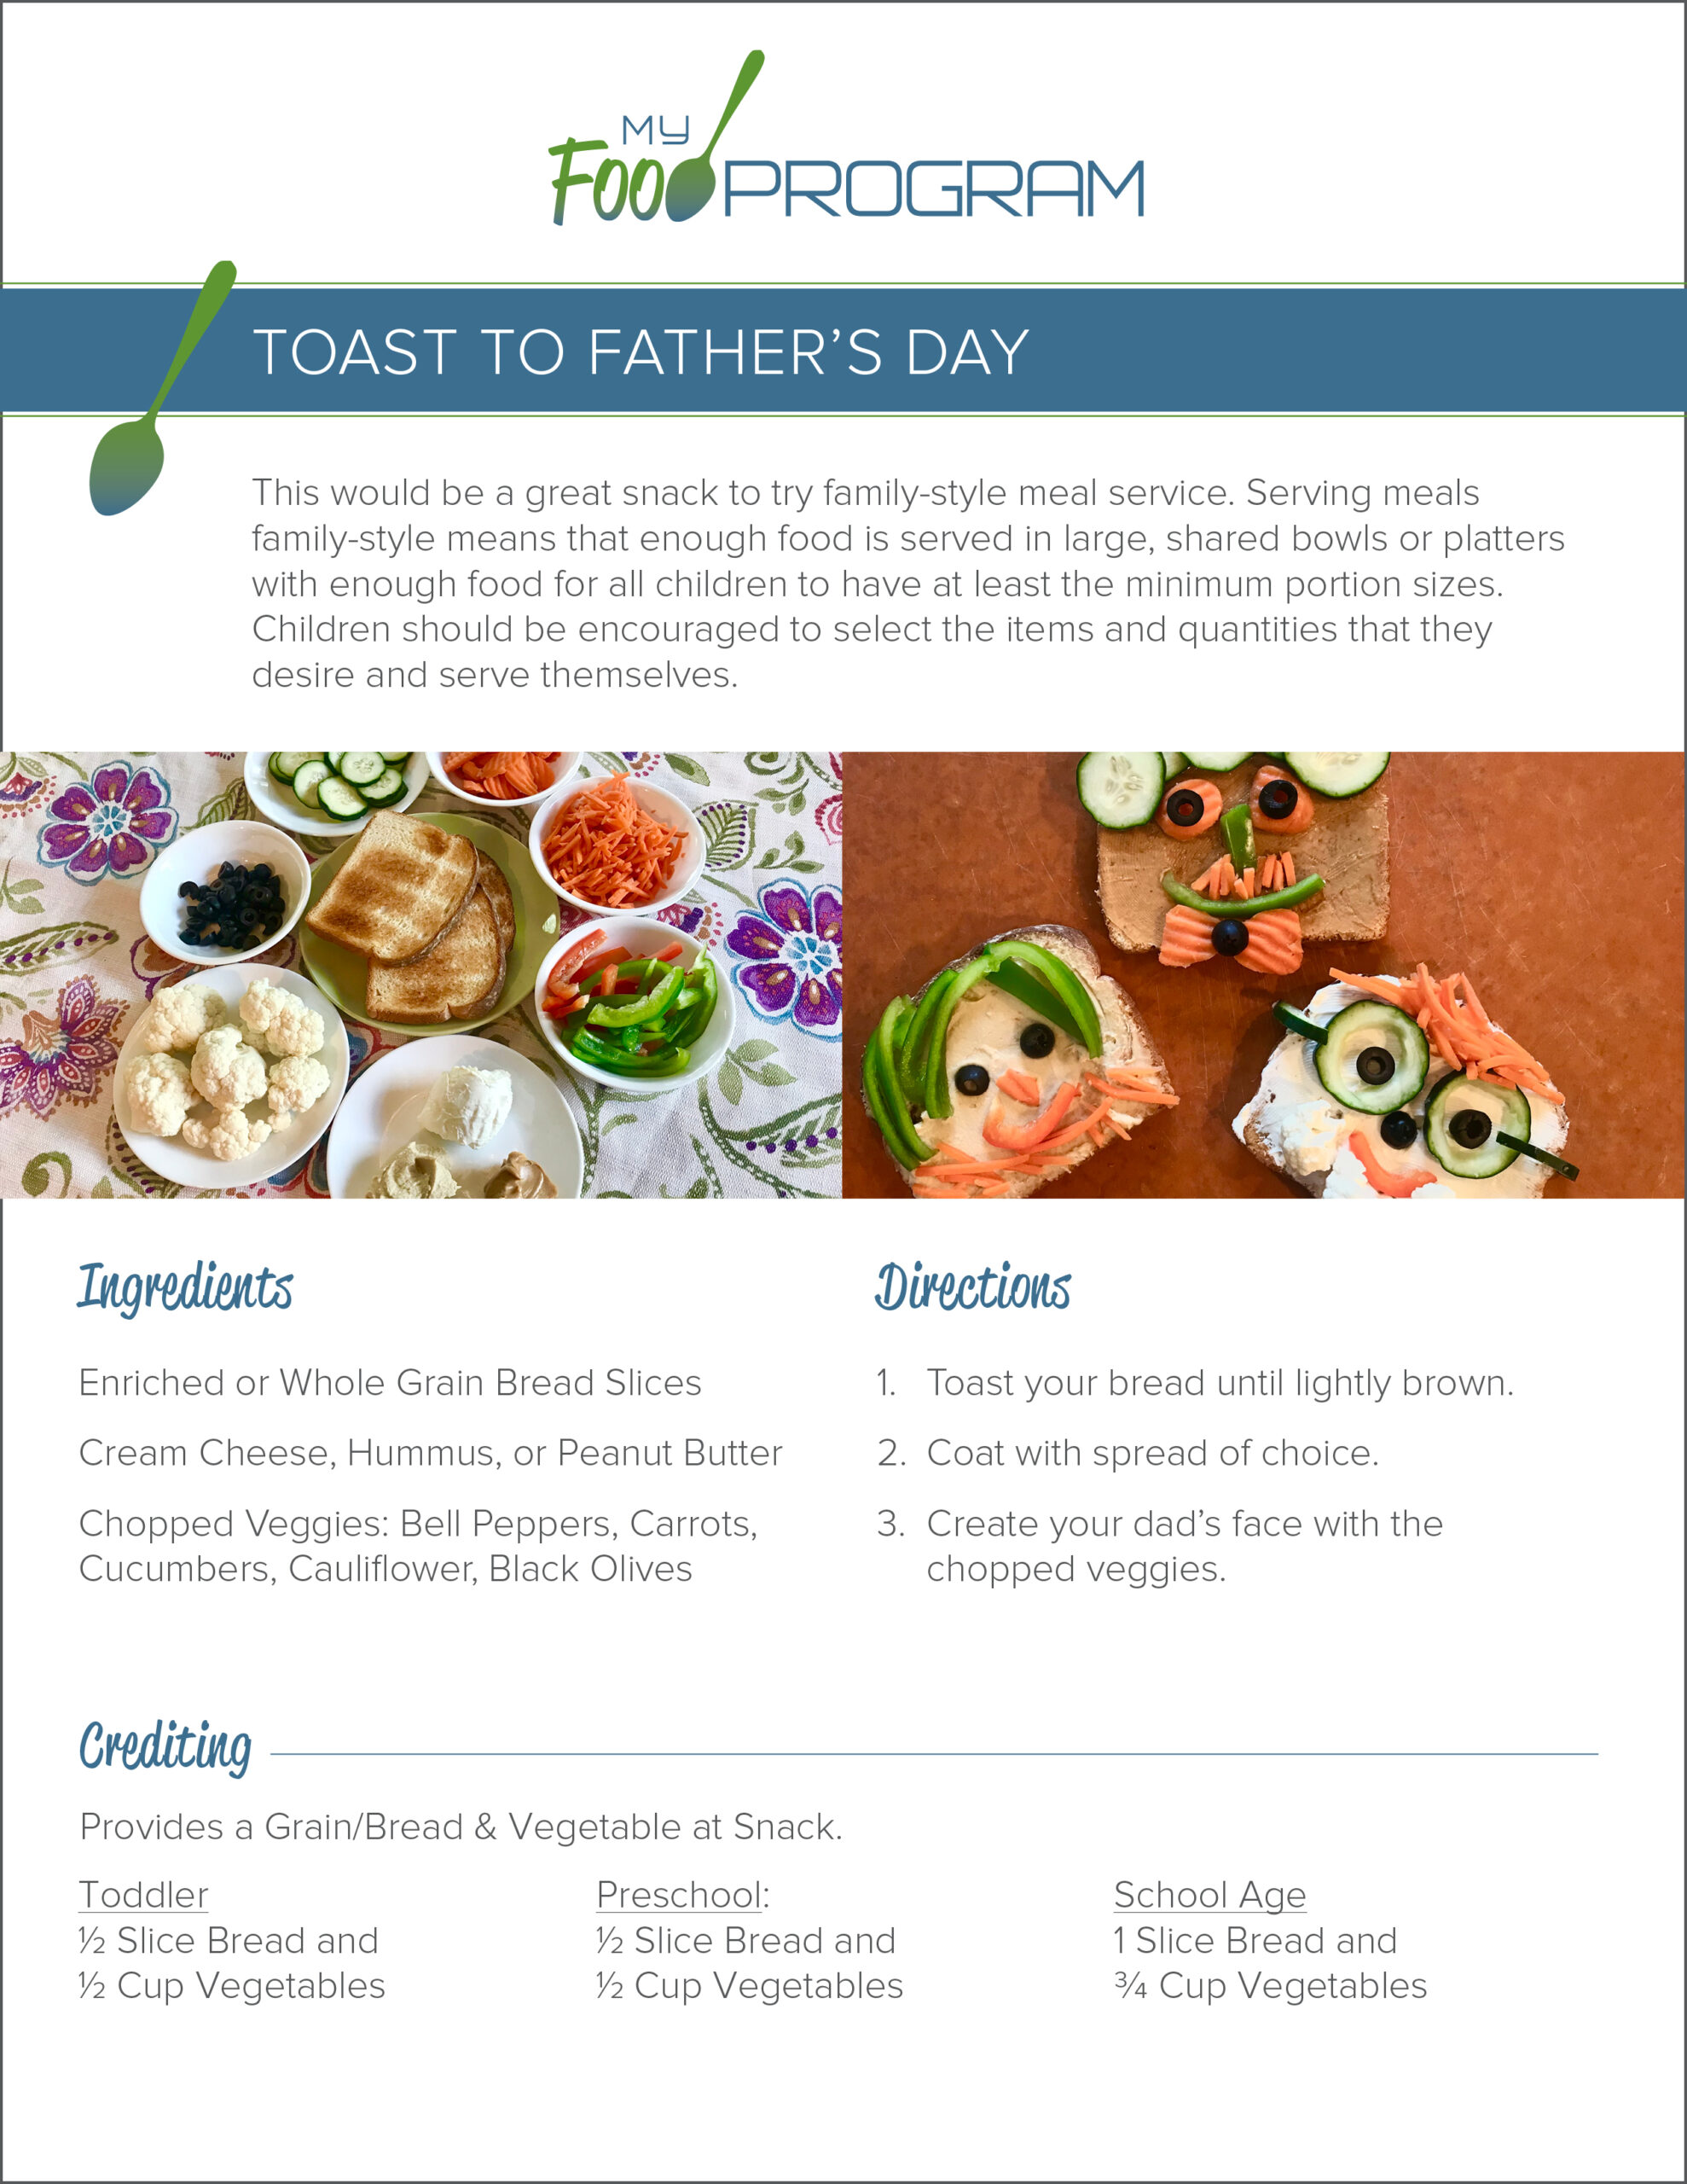 My Food Program Toast to Father's Day Recipe